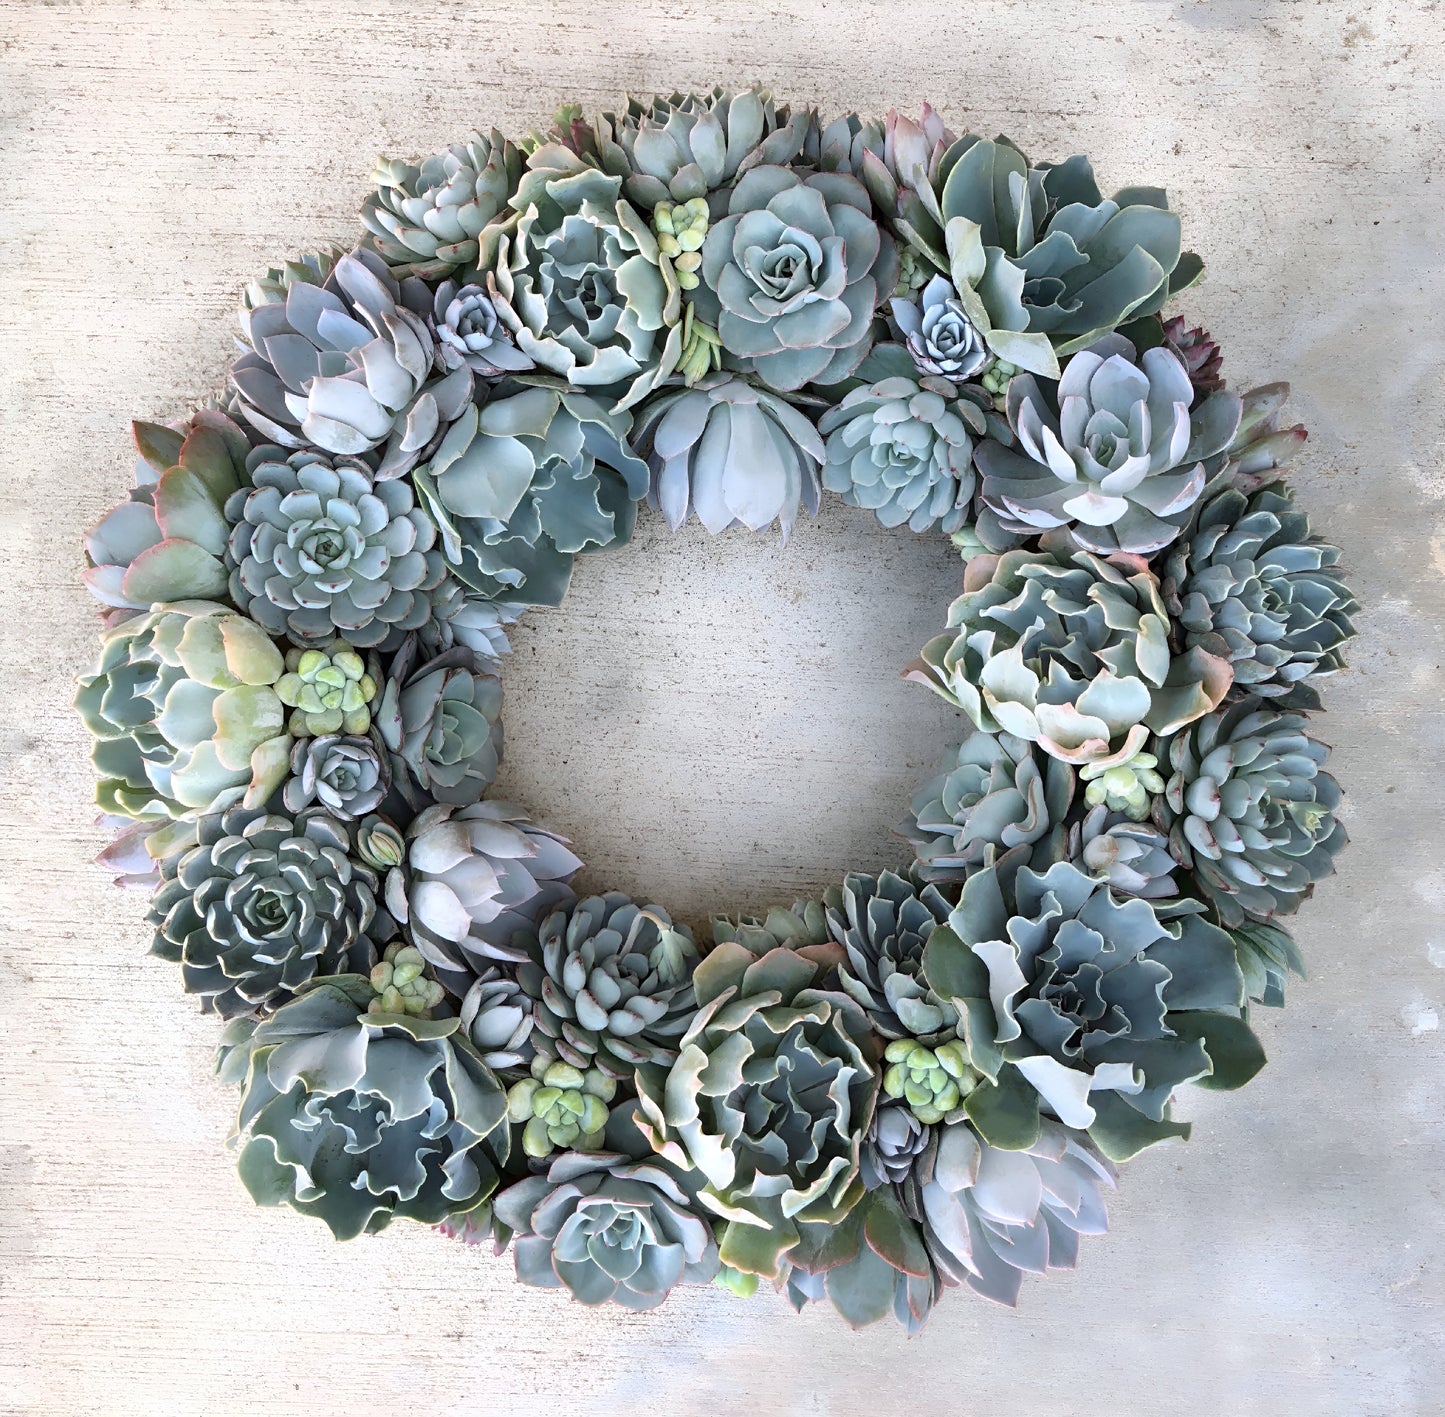 Beach Cottage Wreath in Shades of Blue Succulent Wreath